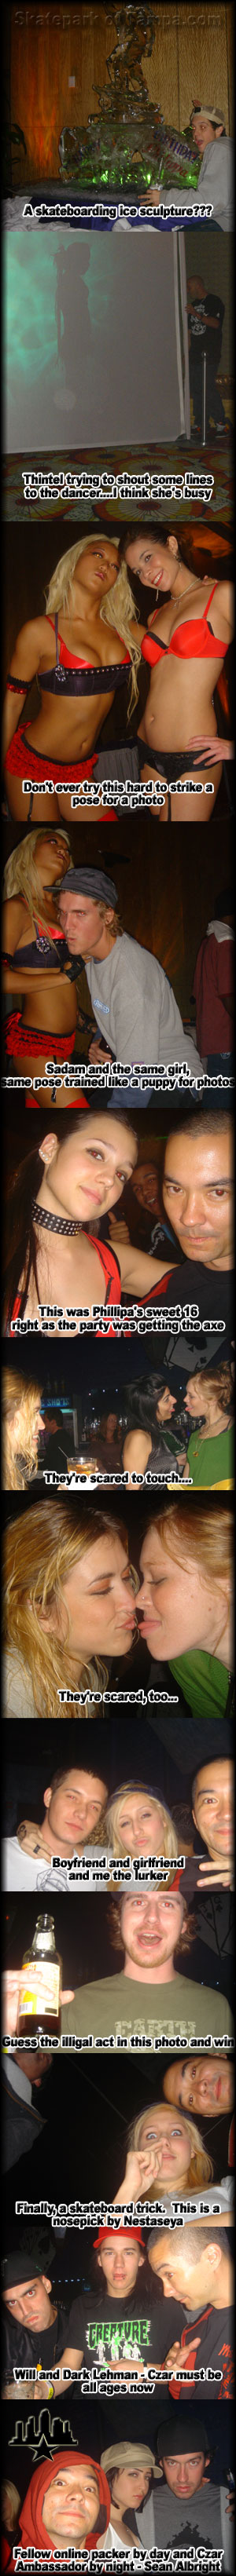 Phillipa's Party and More Nightlife